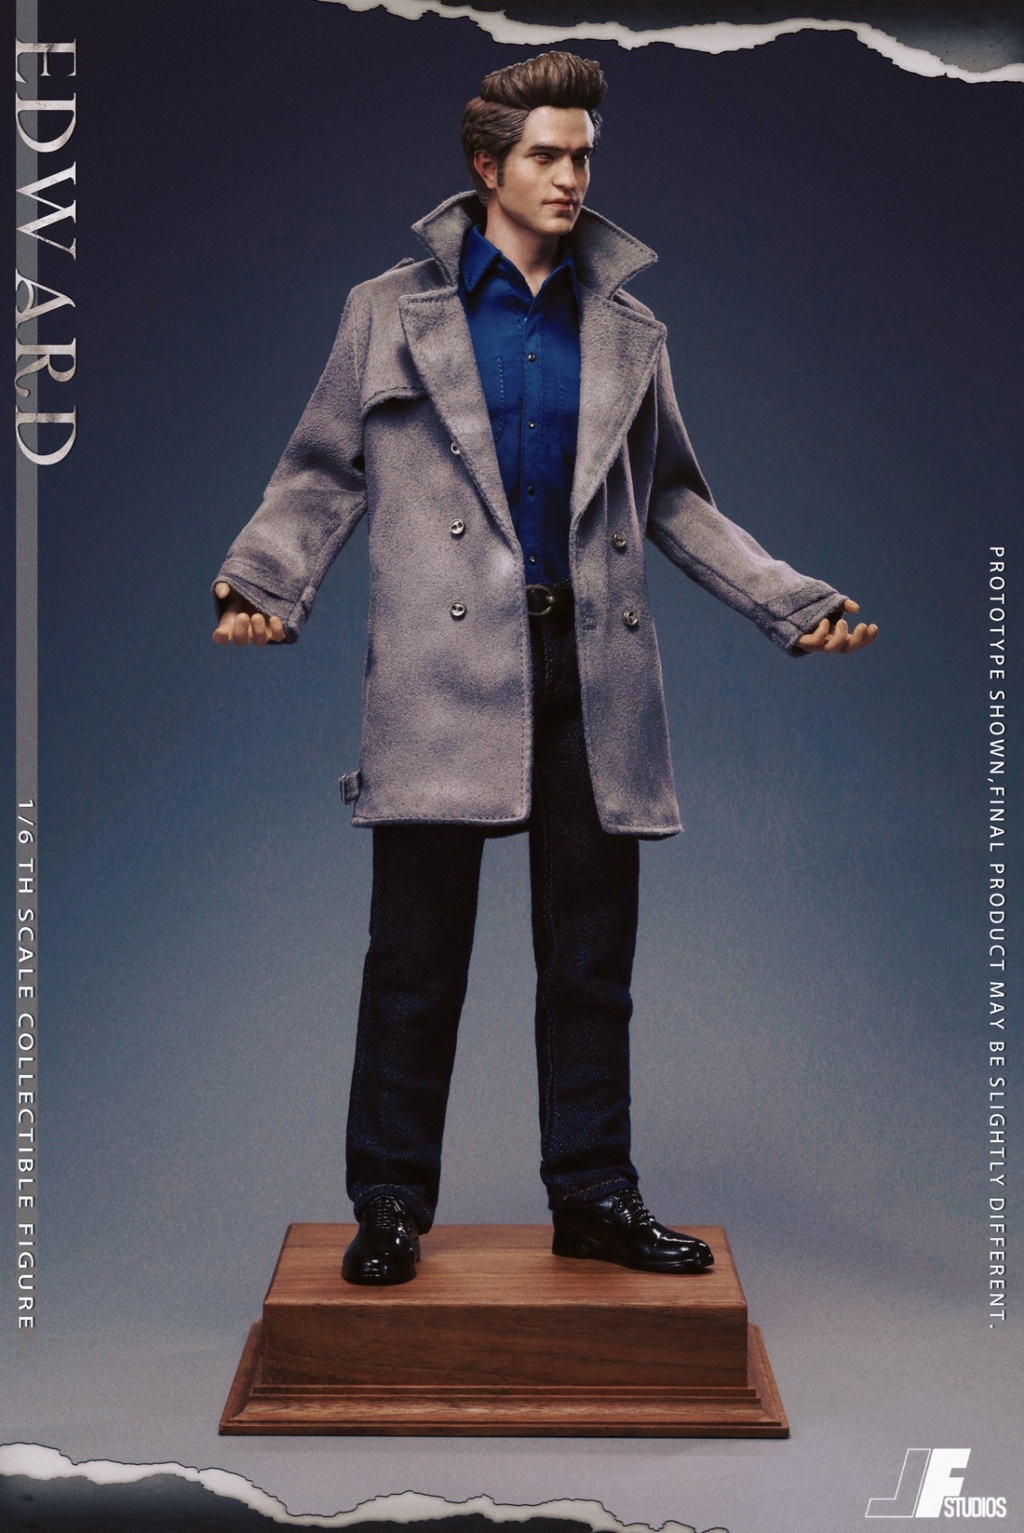 NEW PRODUCT: JF STUFIOS: Children of Twilight Series A "Edward" 1/6 Action Figure 16305610